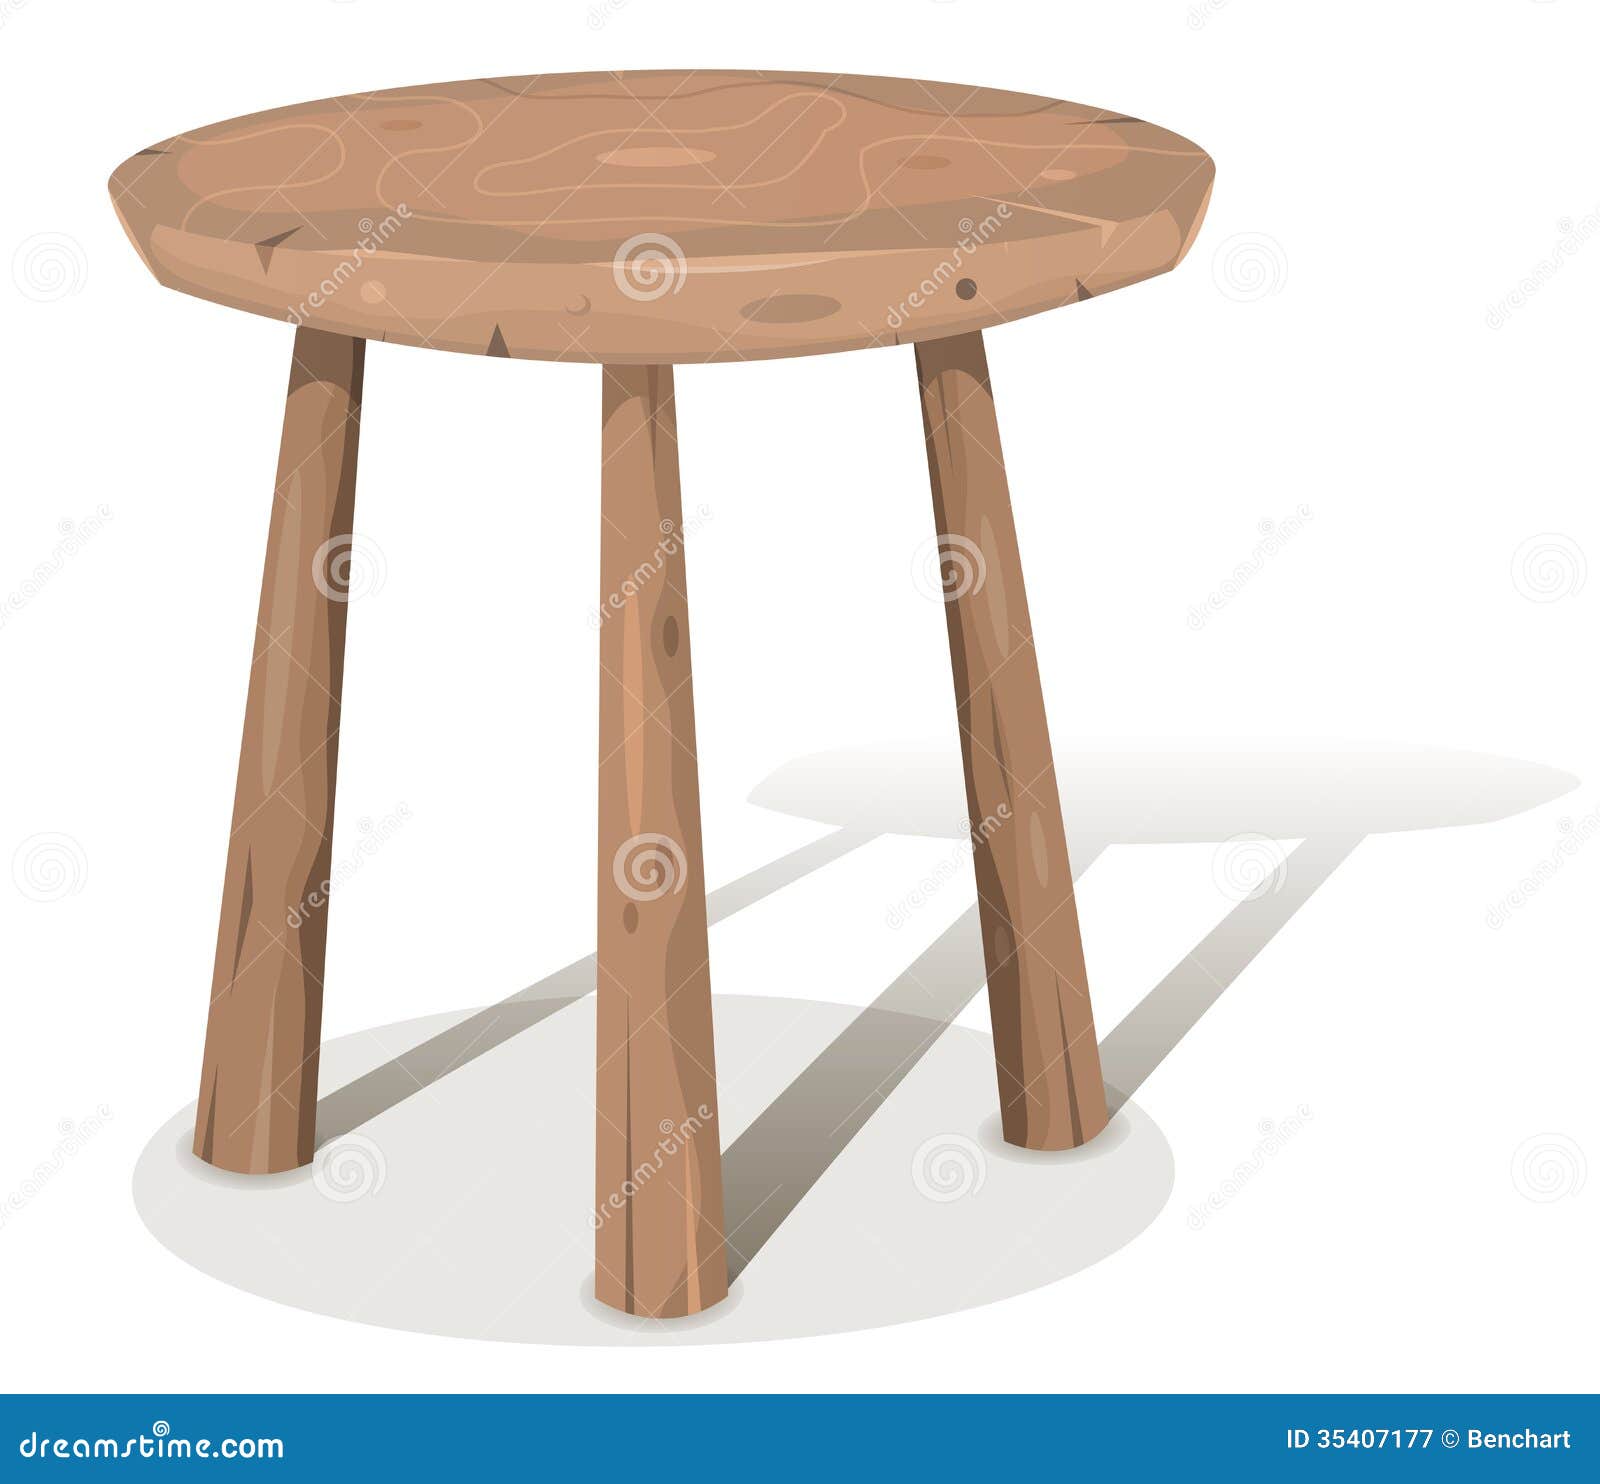 Illustration of a cartoon styled wooden stool or table with shadows.